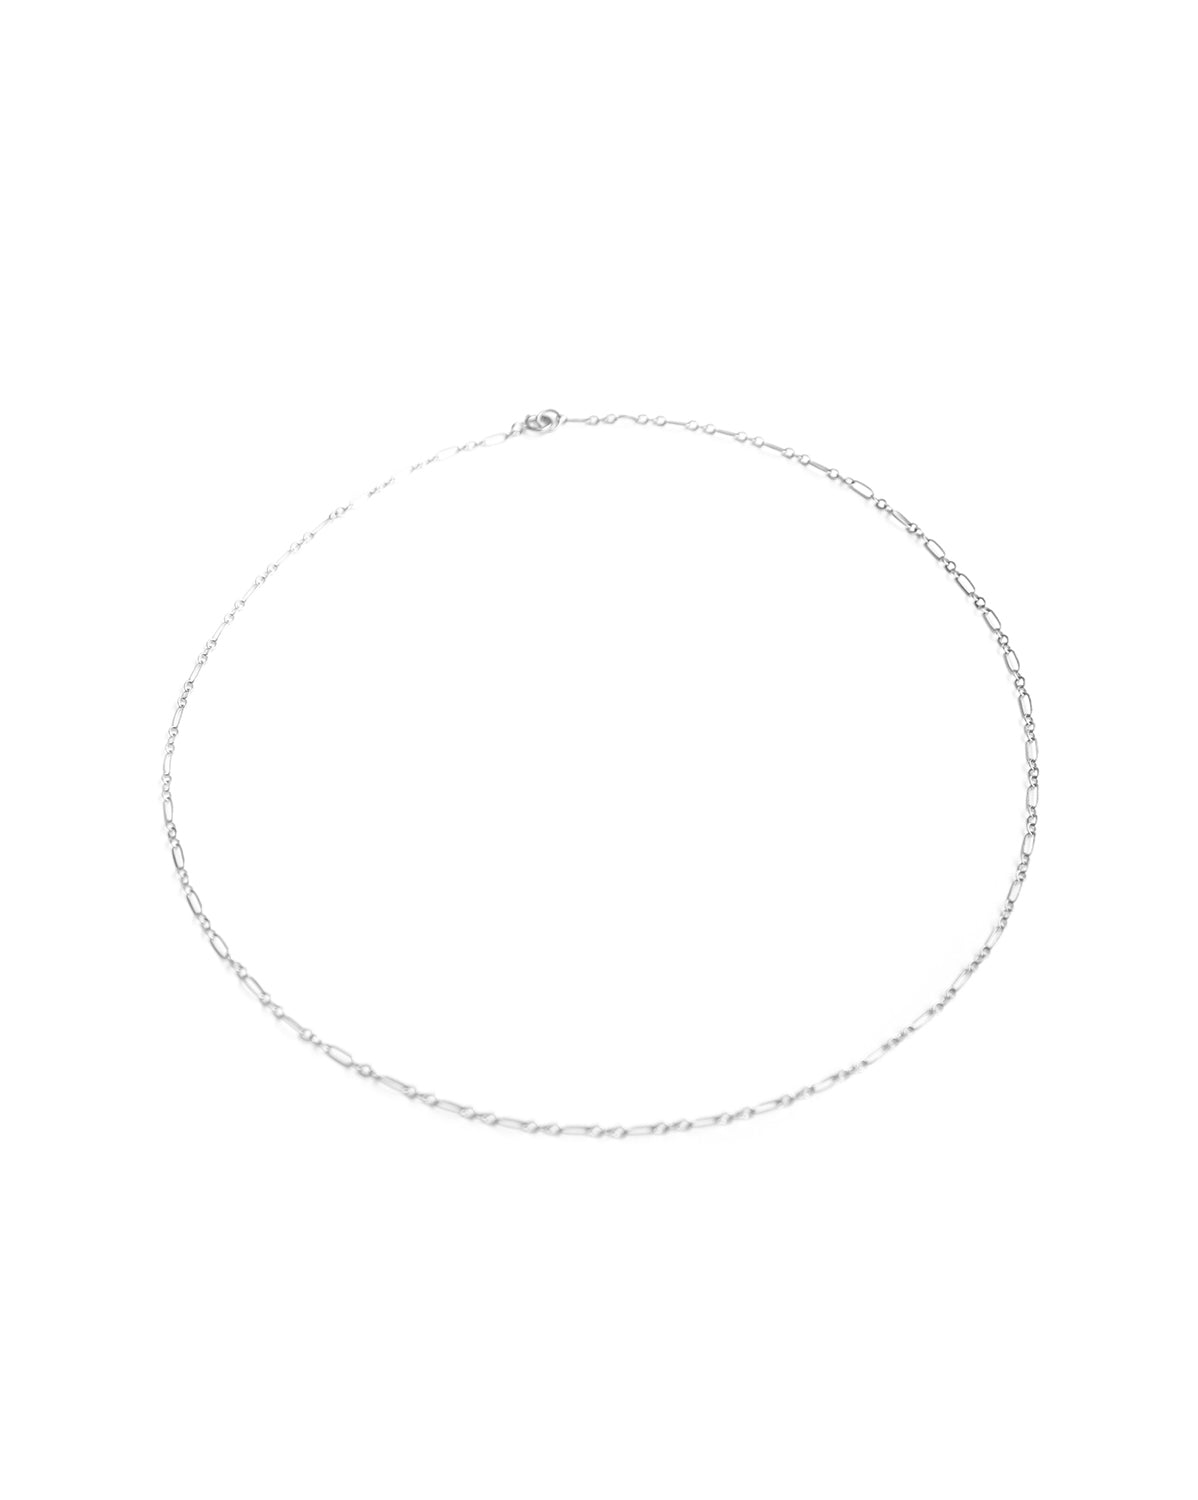 Rosalita Dainty Chain Necklace - Sterling Silver